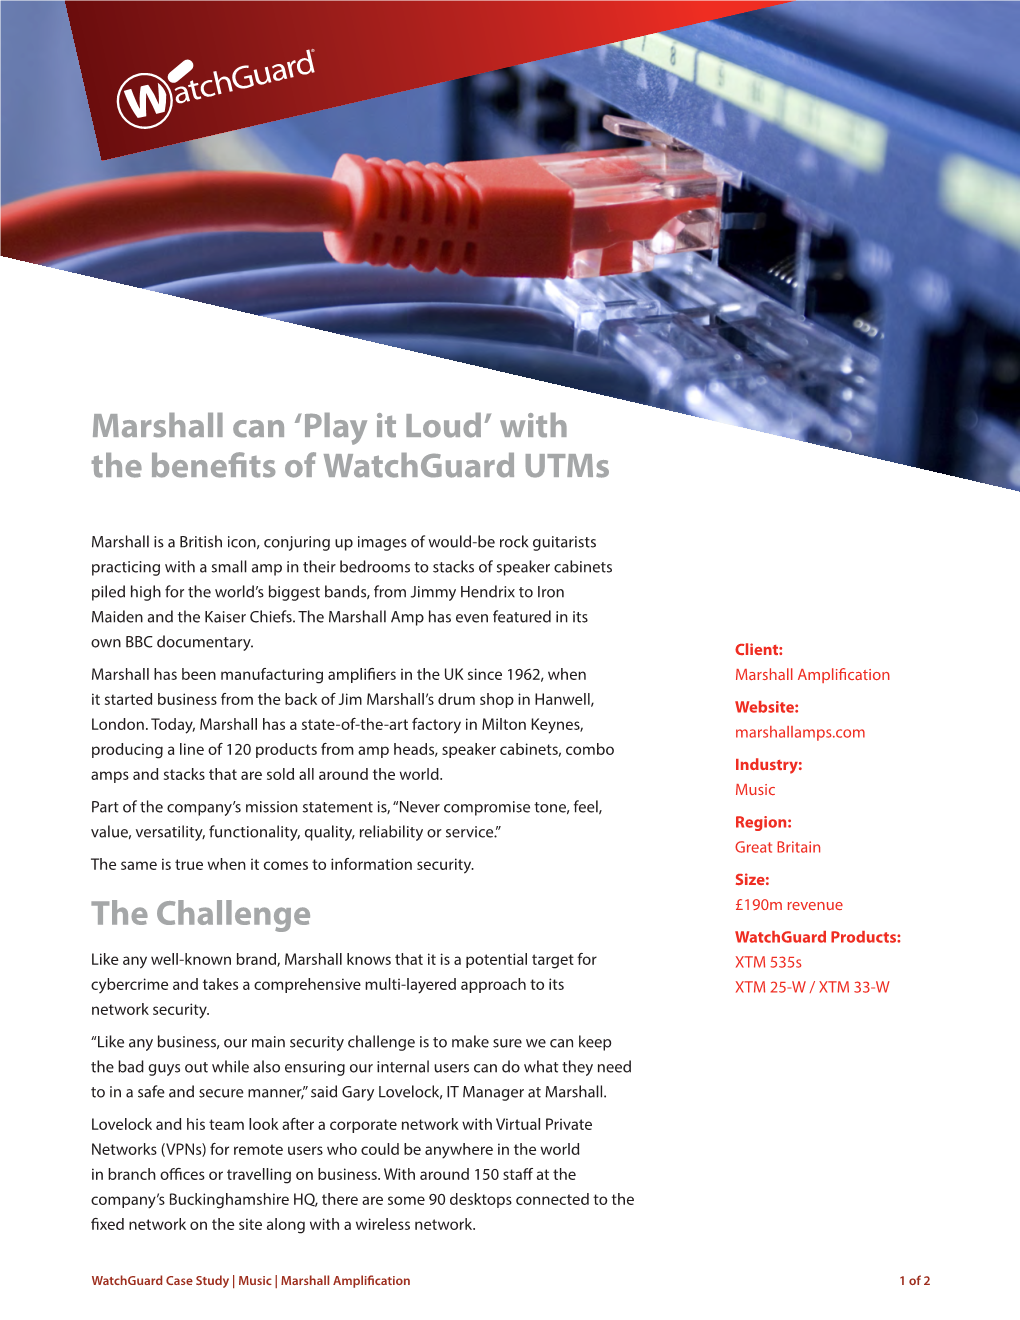 Marshall Can ‘Play It Loud’ with the Benefits of Watchguard Utms